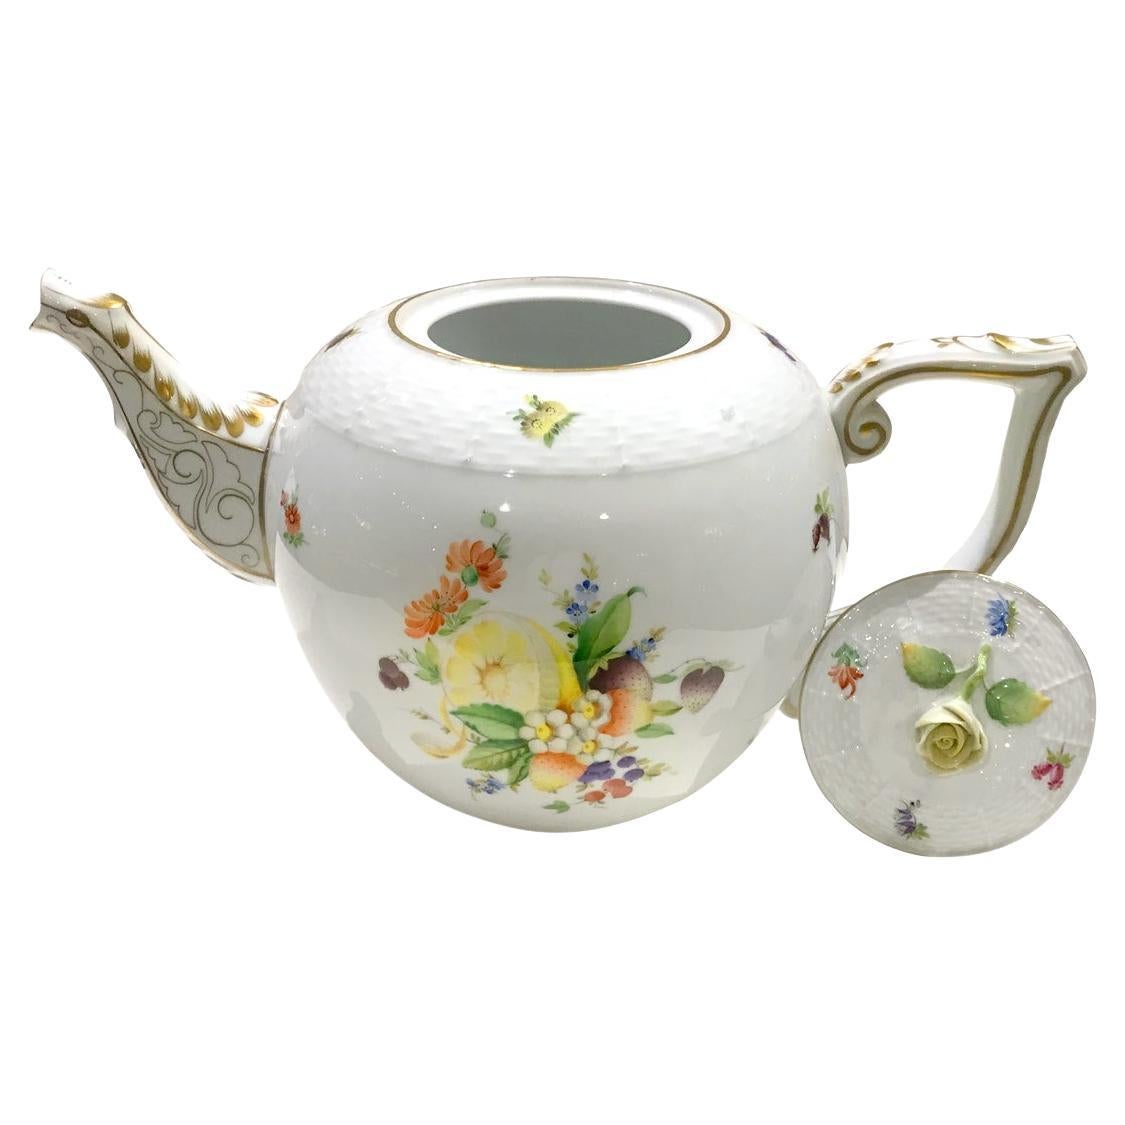 Lovely XXL size Herend Porcelain Teapot. CFR model, decorated with fruits such as lemons, strawberries, and flowers hand-painted. The teapot has a wickerwork texture finish on the lid, known as the 